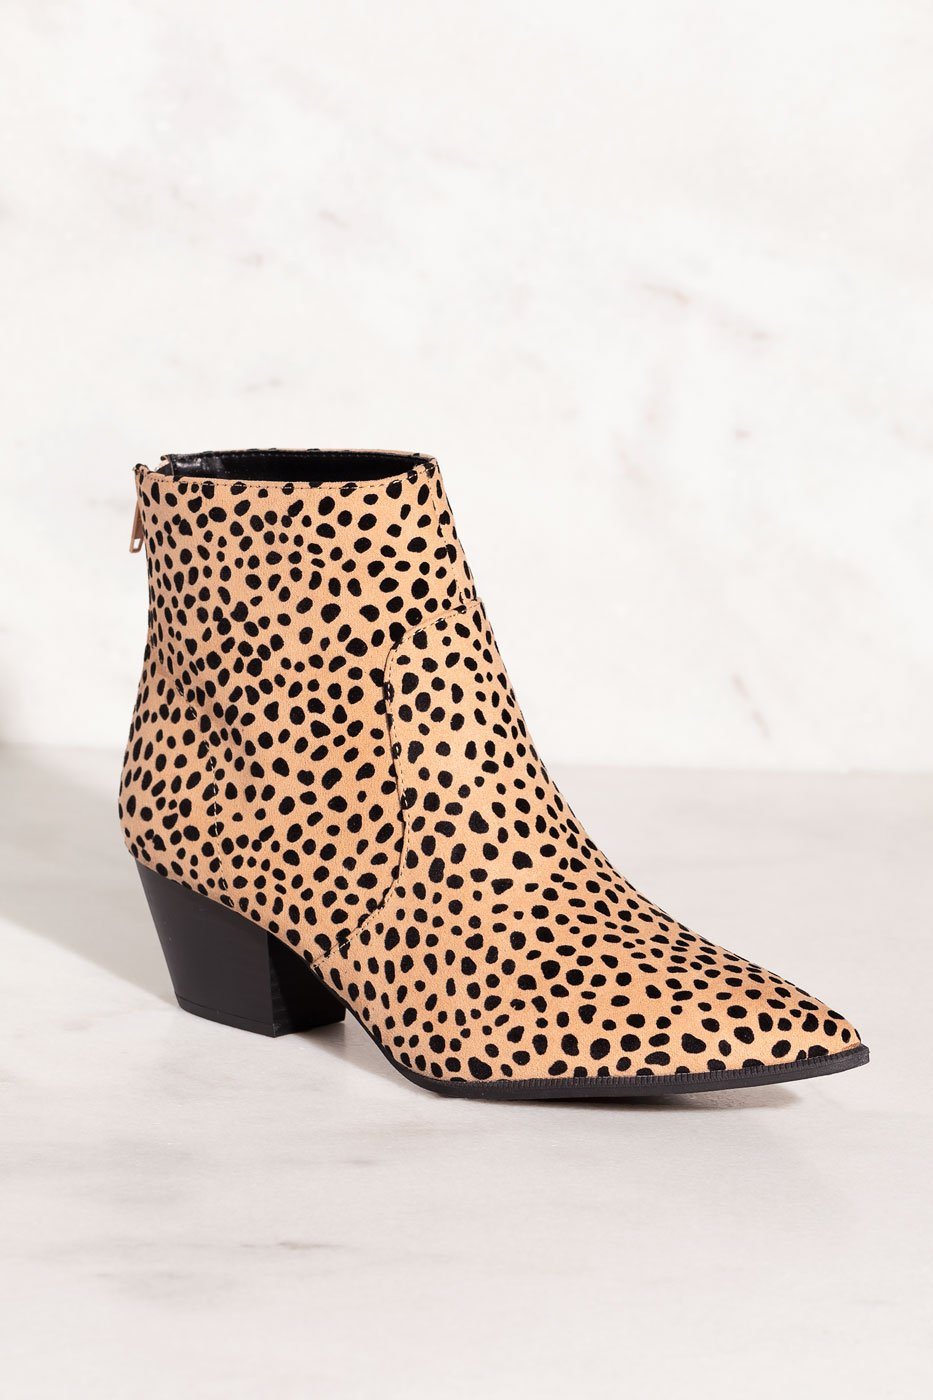 Go Wild Leopard Print Pointed-Toe Booties